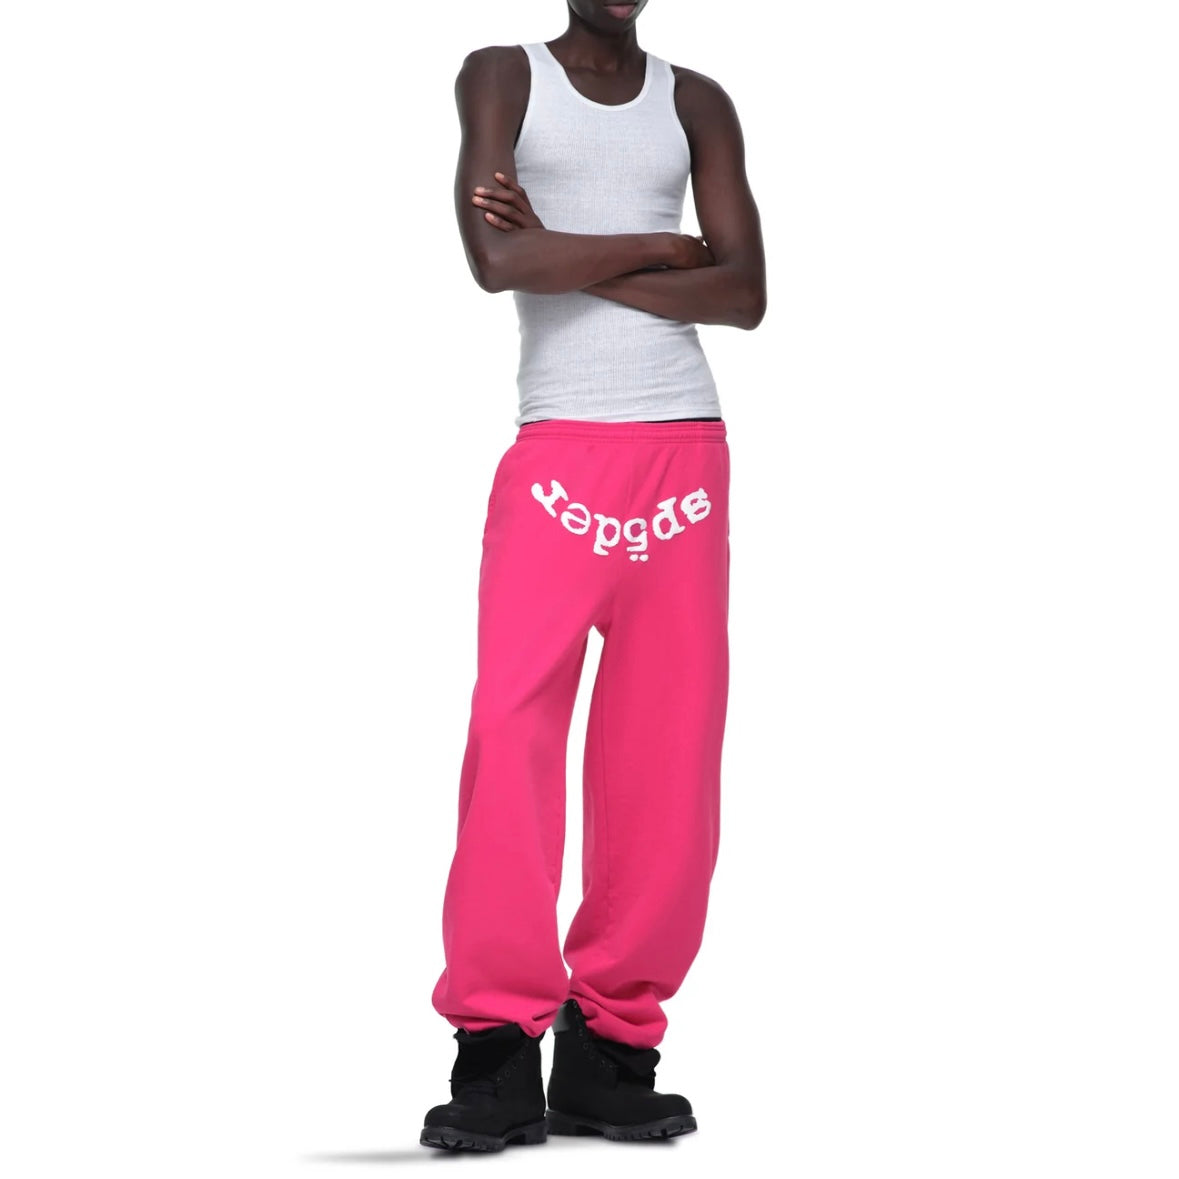 Sp5der Pink White Legacy Sweatpants On Body Front Male